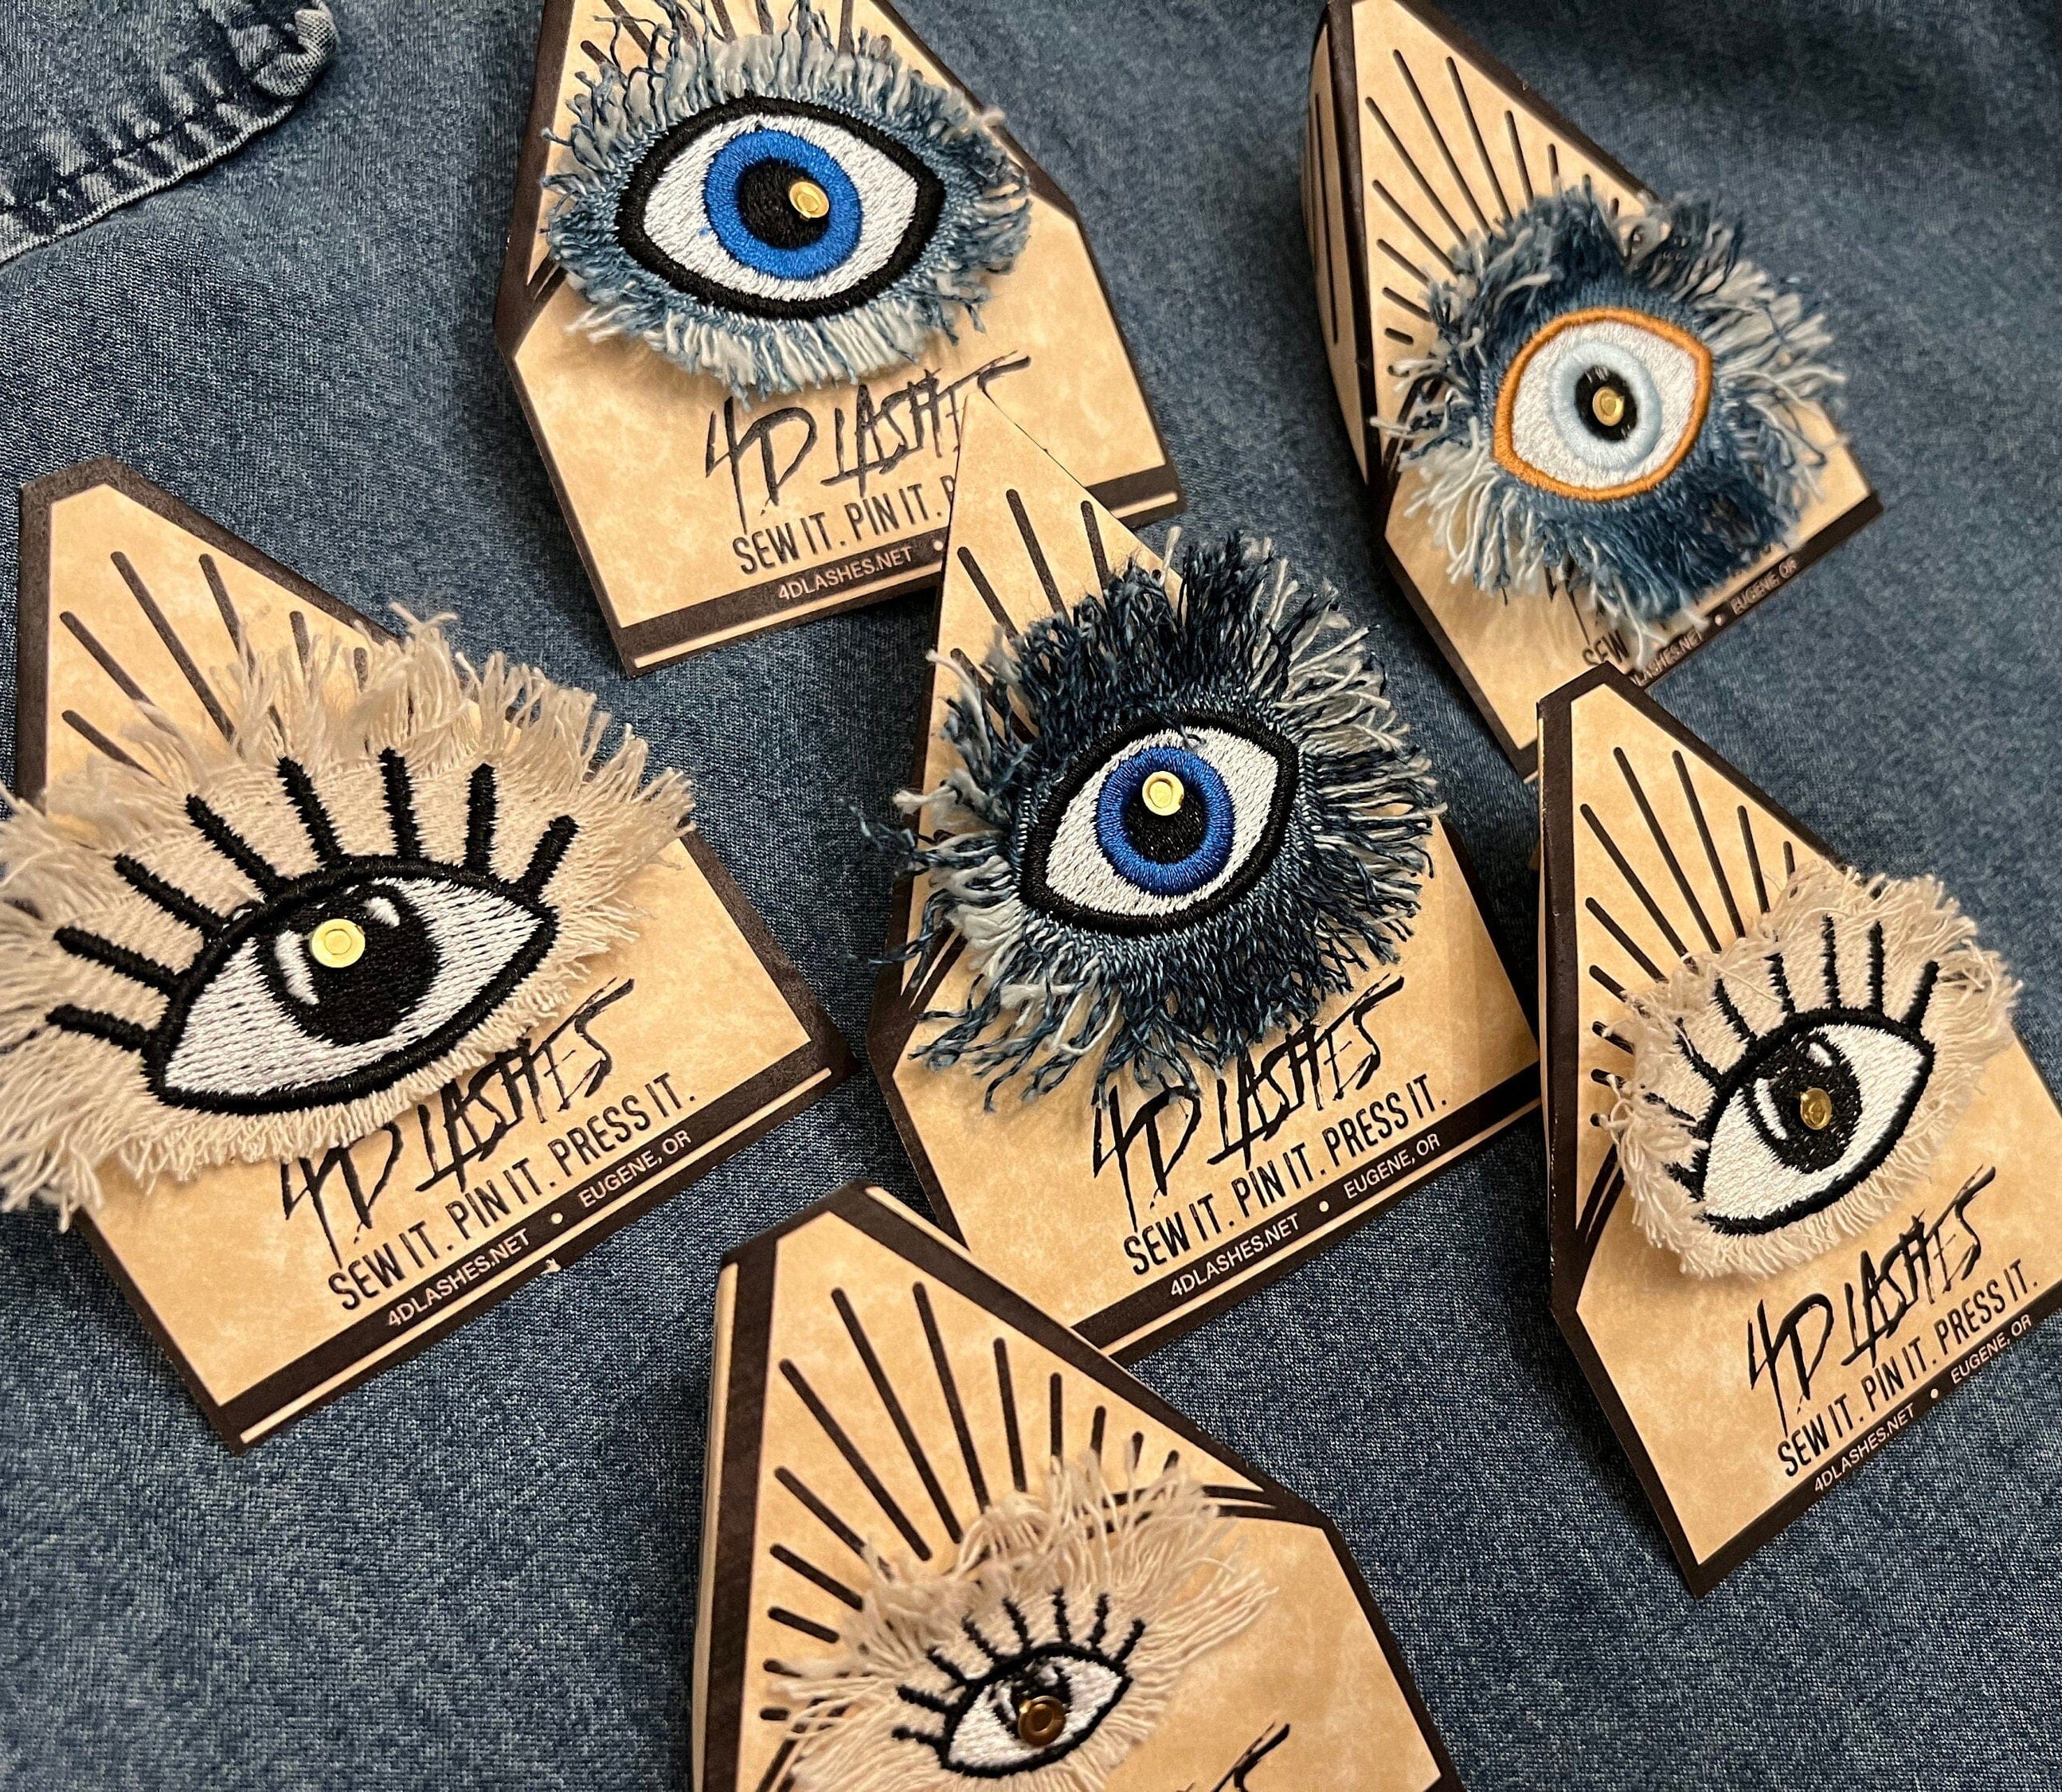 Super Fuzz Shredded Denim GOOD KARMA Green EYE Patch Handmade Embroidery Protective Talisman Decal Bridal Party Bachelorette office gift Brooches & Lapel Pins